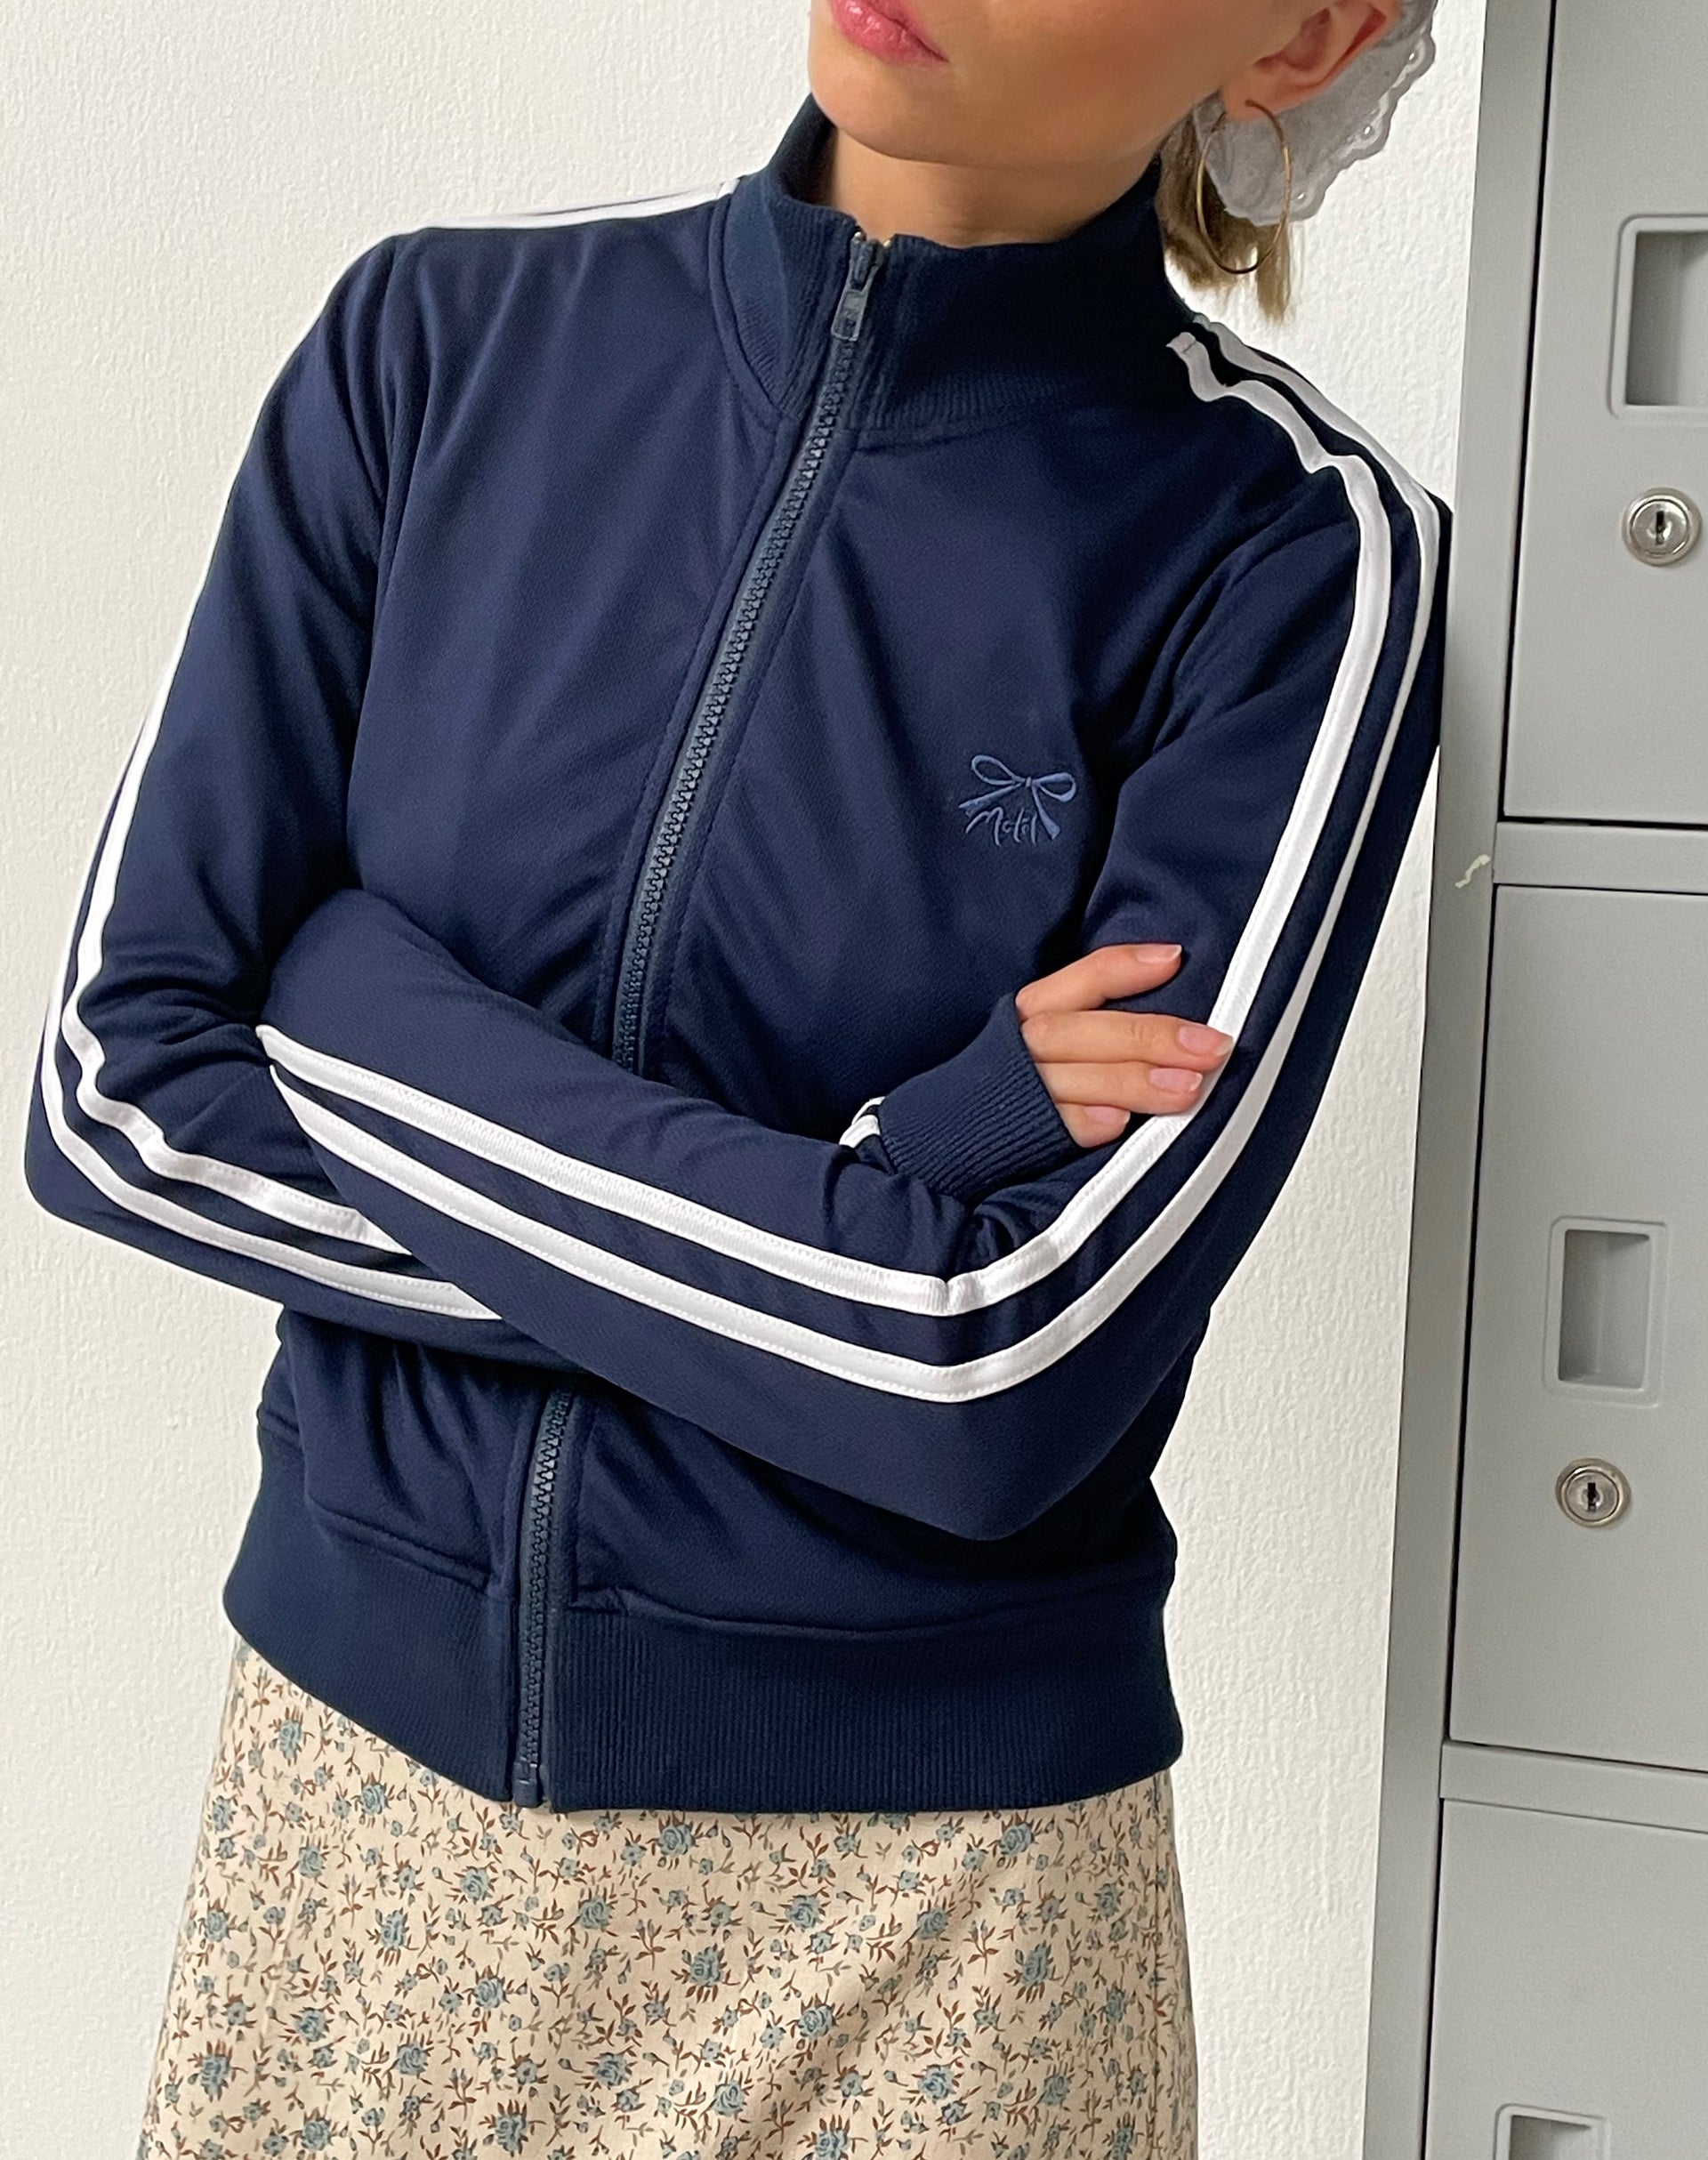 Image of Orion Zip Up Jumper in Navy with White Stripes and M Embroidery